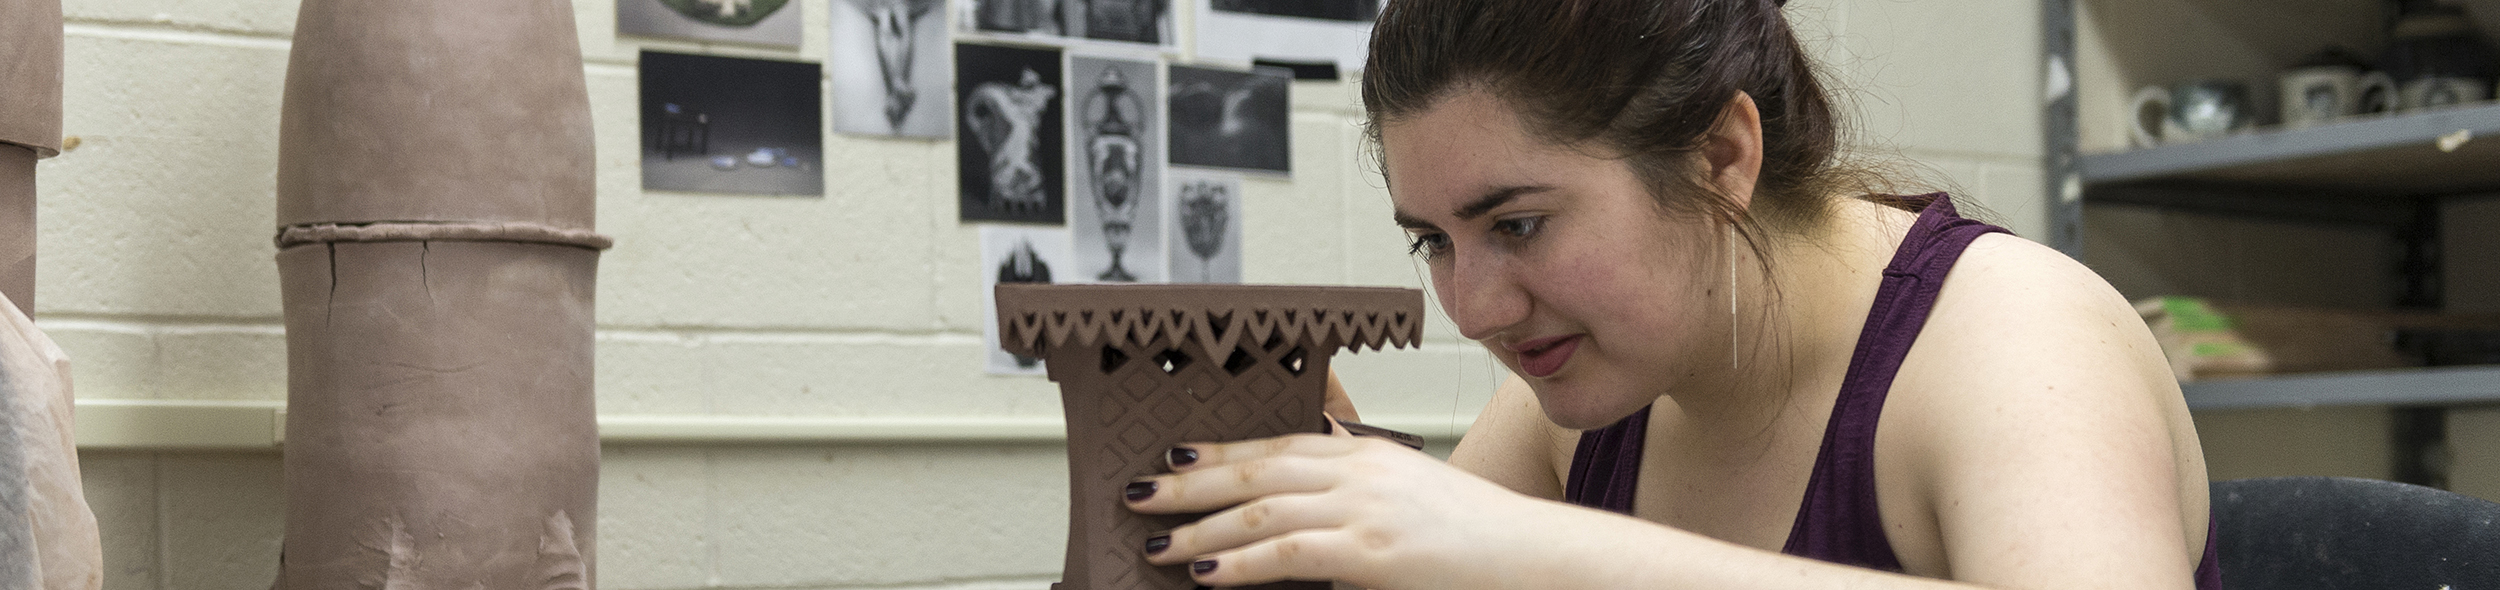 A student works on the fine details of a ceramics project.